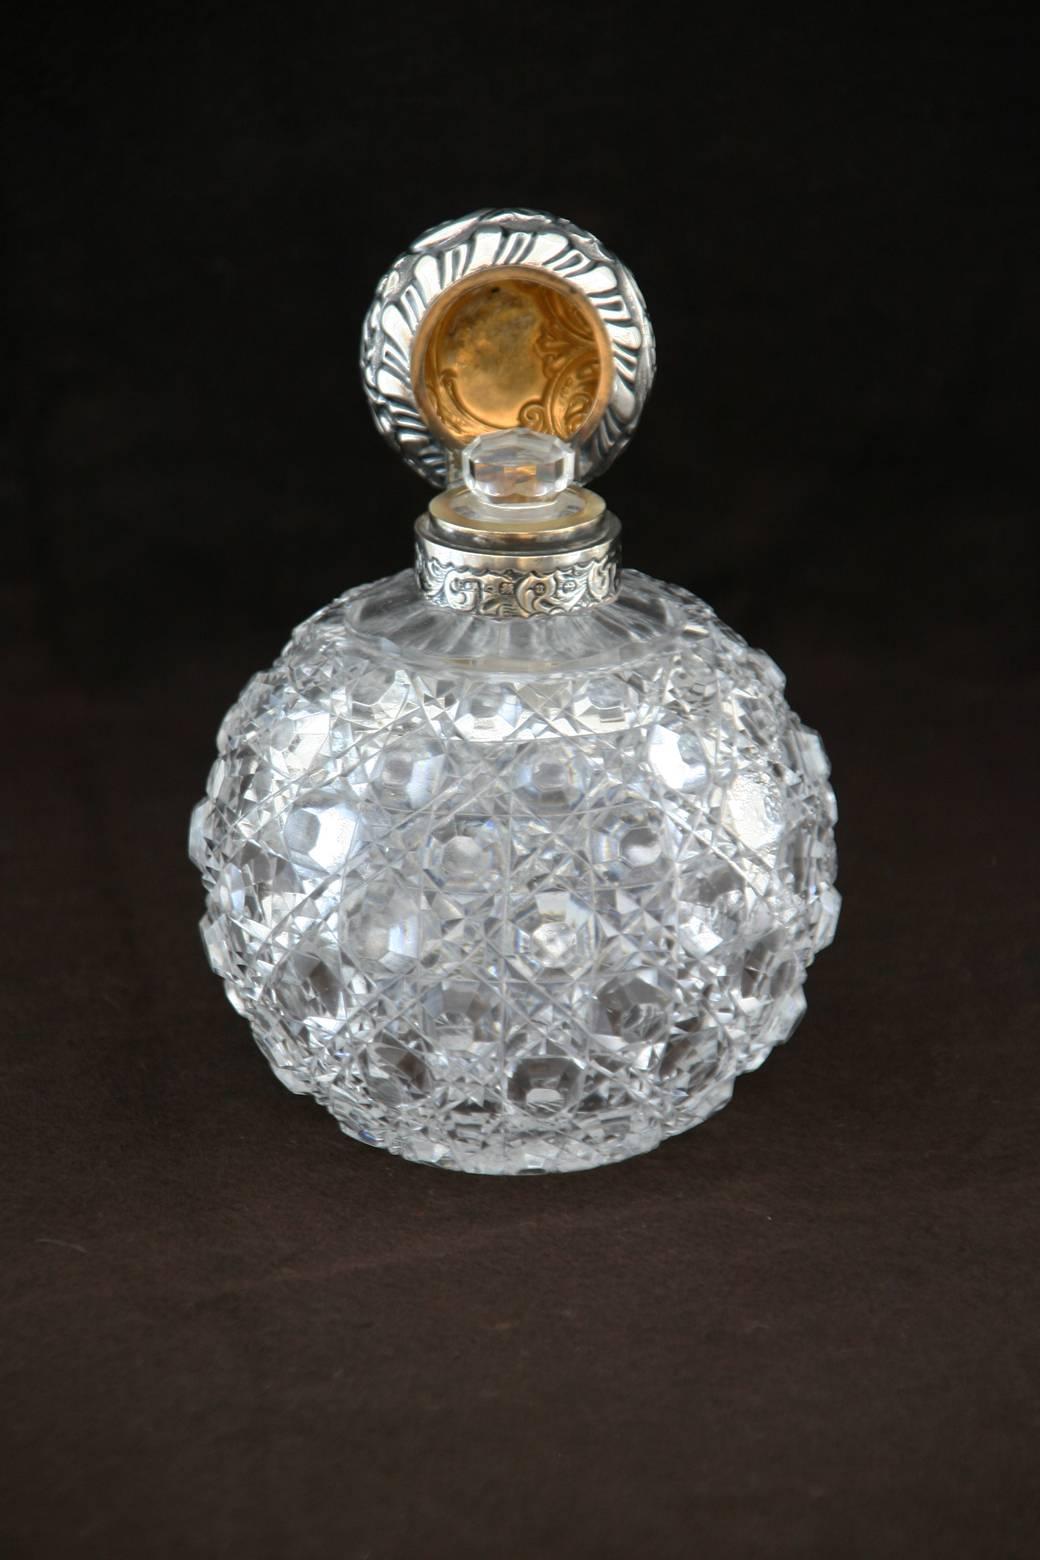 An English cut-glass perfume bottle with silver repousse lid and original stopper. Victorian silver marks.